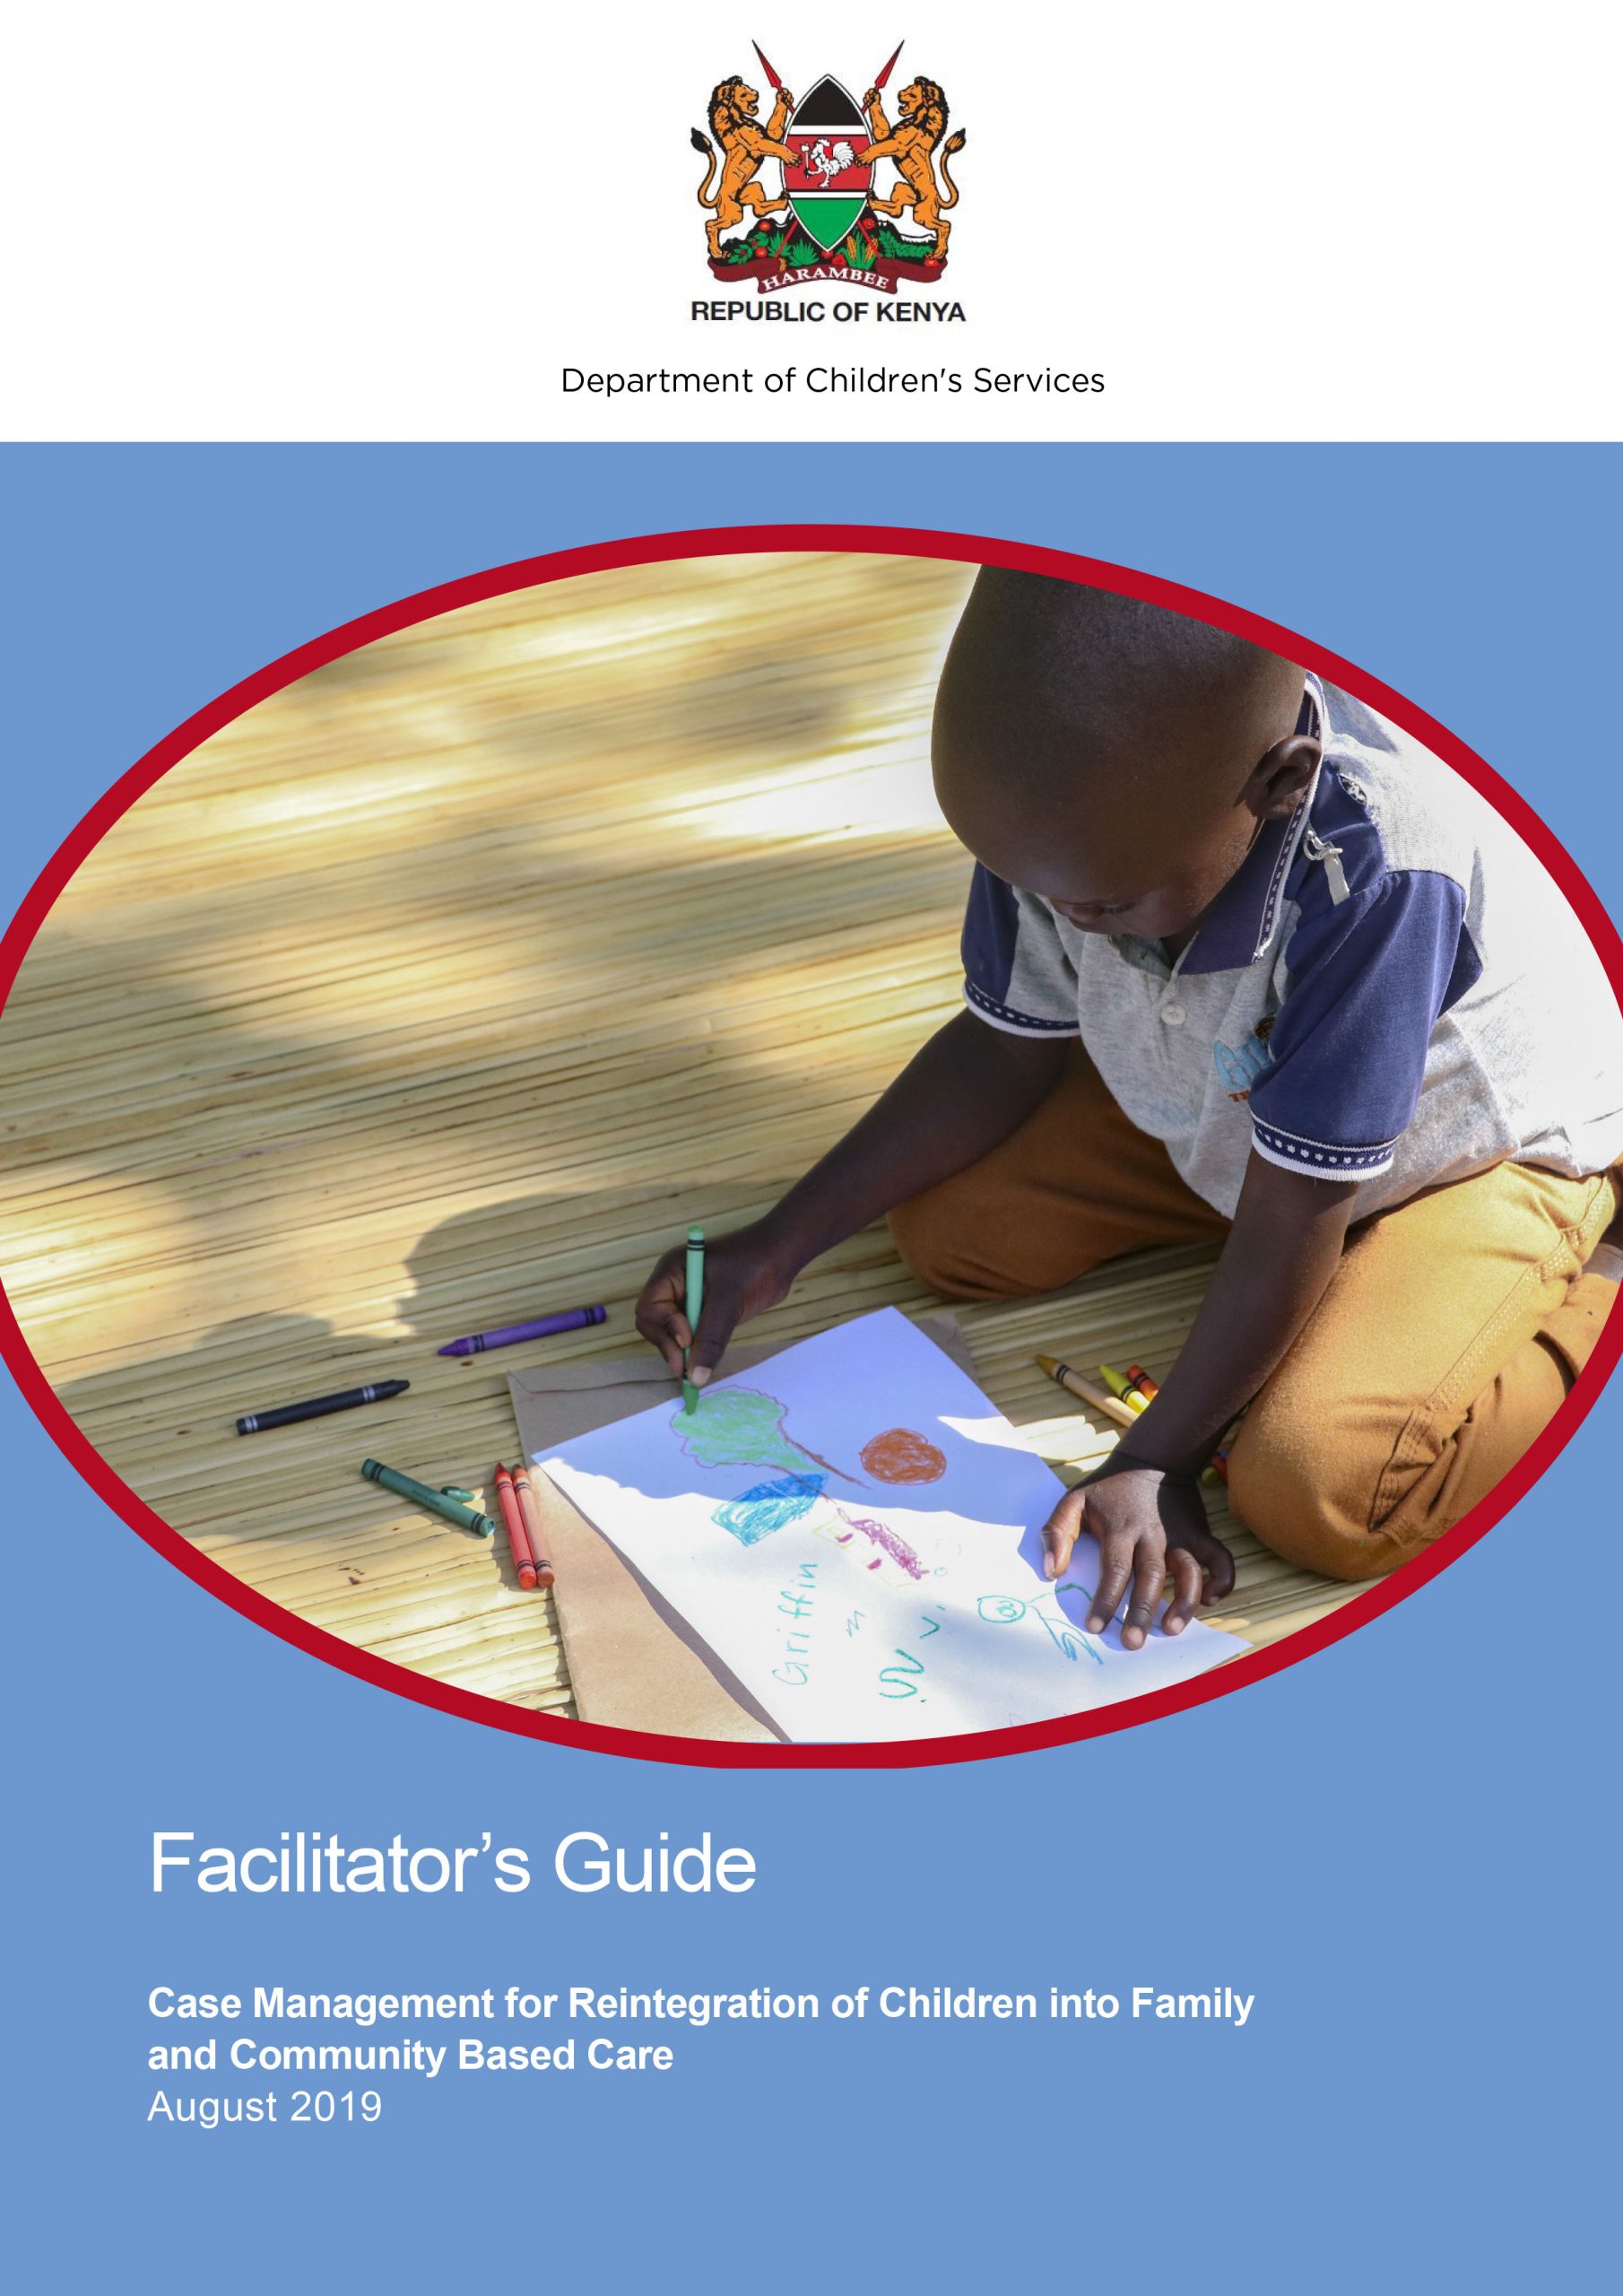 Case Management for Reintegration of Children into Family and Community Based Care - Facilitator’s Guide (August 2019)